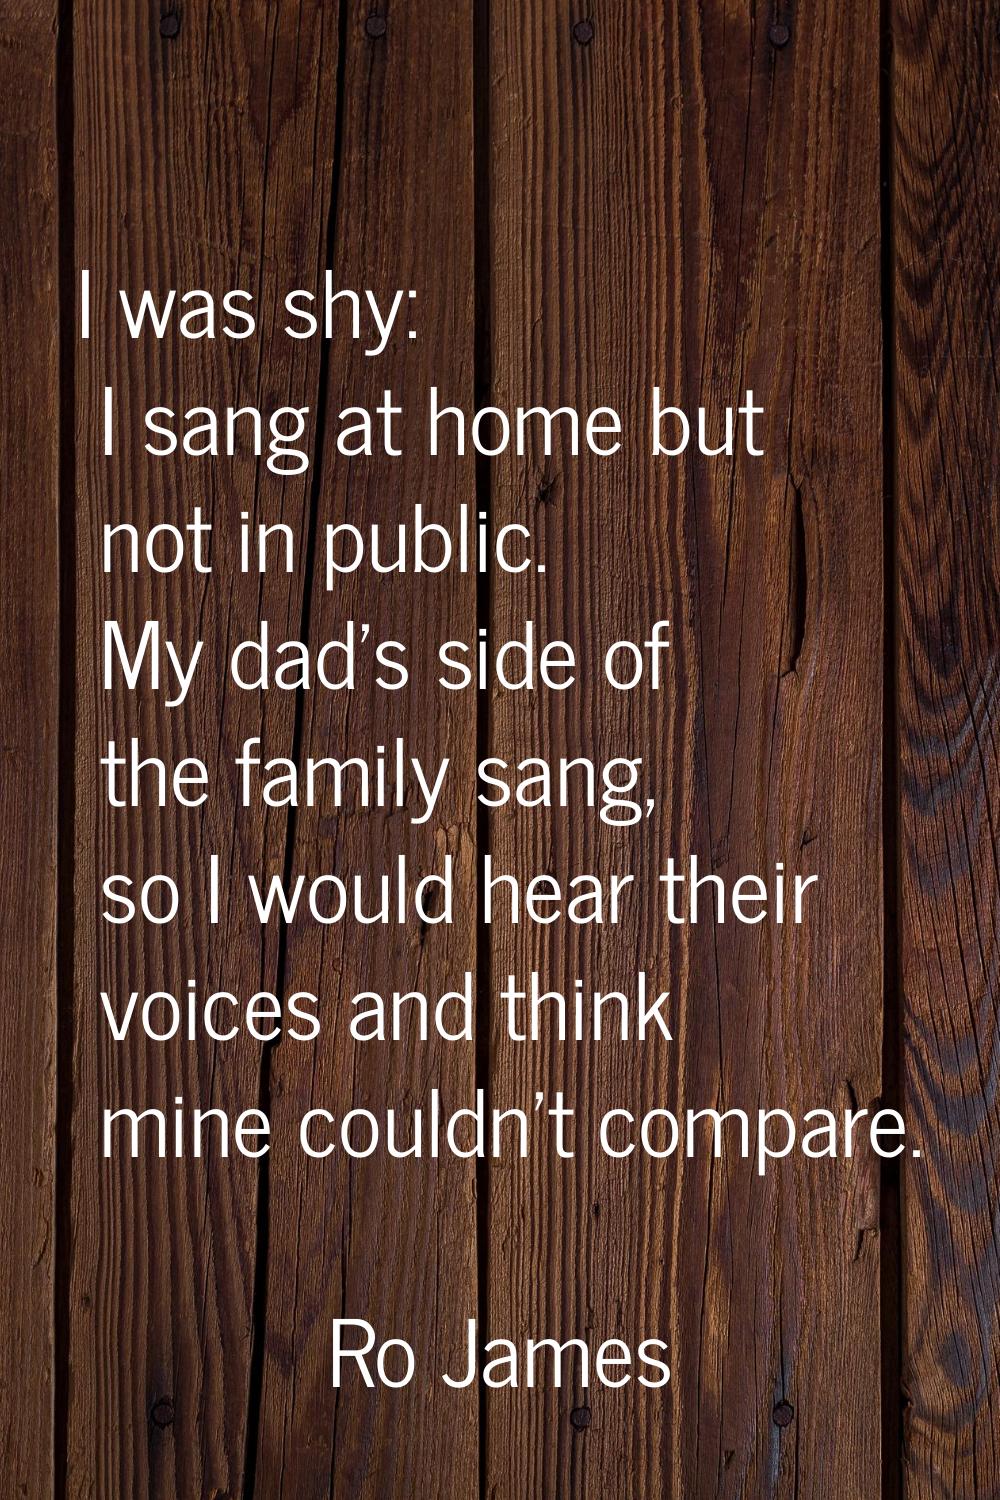 I was shy: I sang at home but not in public. My dad's side of the family sang, so I would hear thei